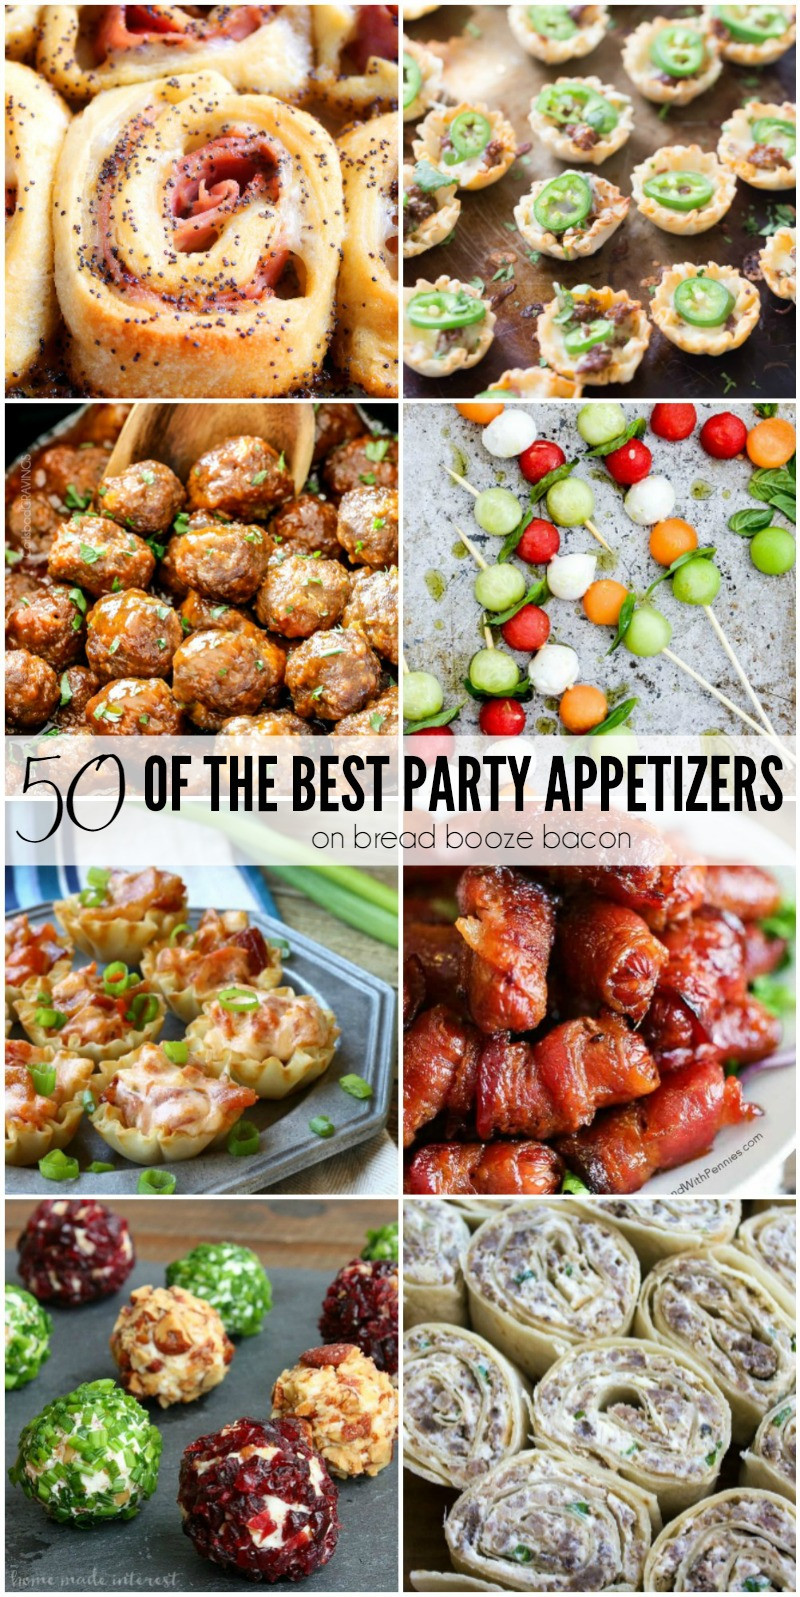 Best Christmas Party Appetizers
 50 of the Best Party Appetizers • Bread Booze Bacon